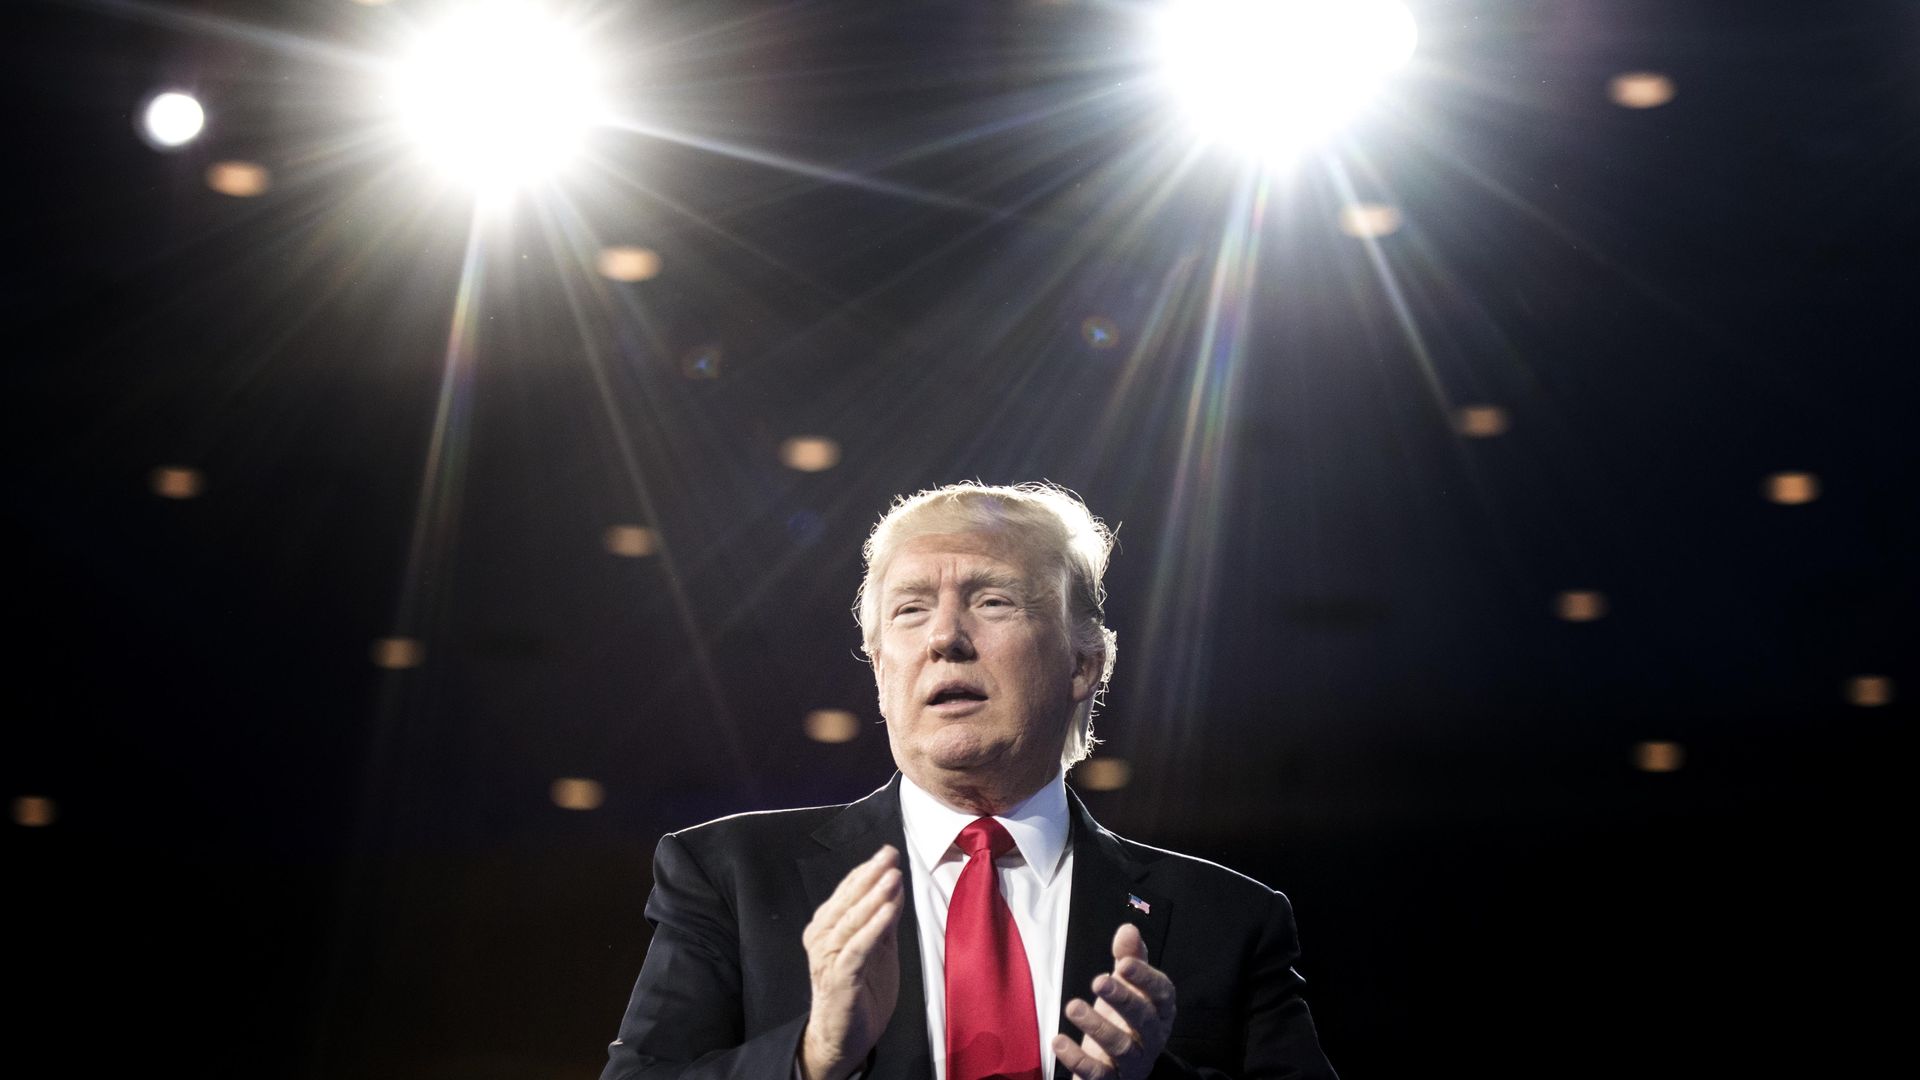 In this image, President Trump stands on stage behind two bright lights.